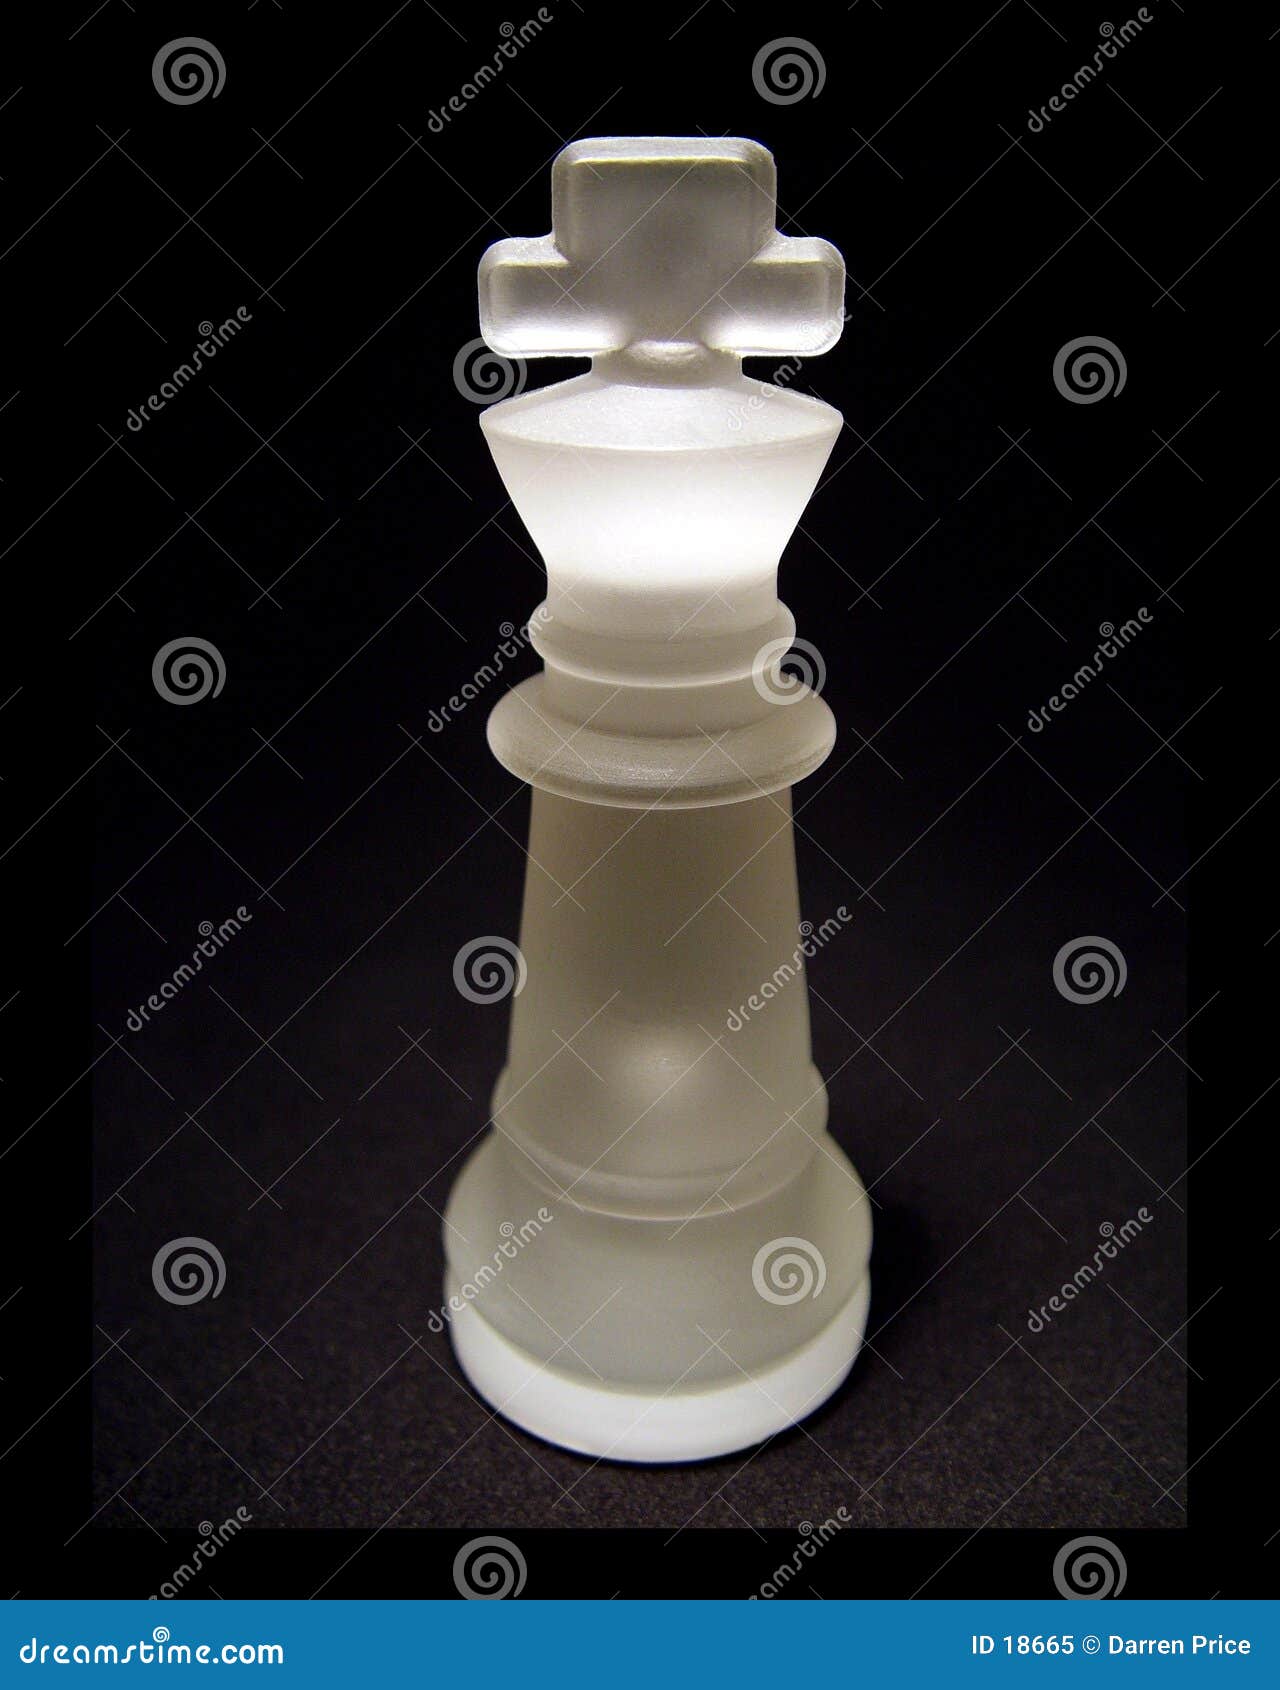 King Chess Piece Stock Photos, Images and Backgrounds for Free Download